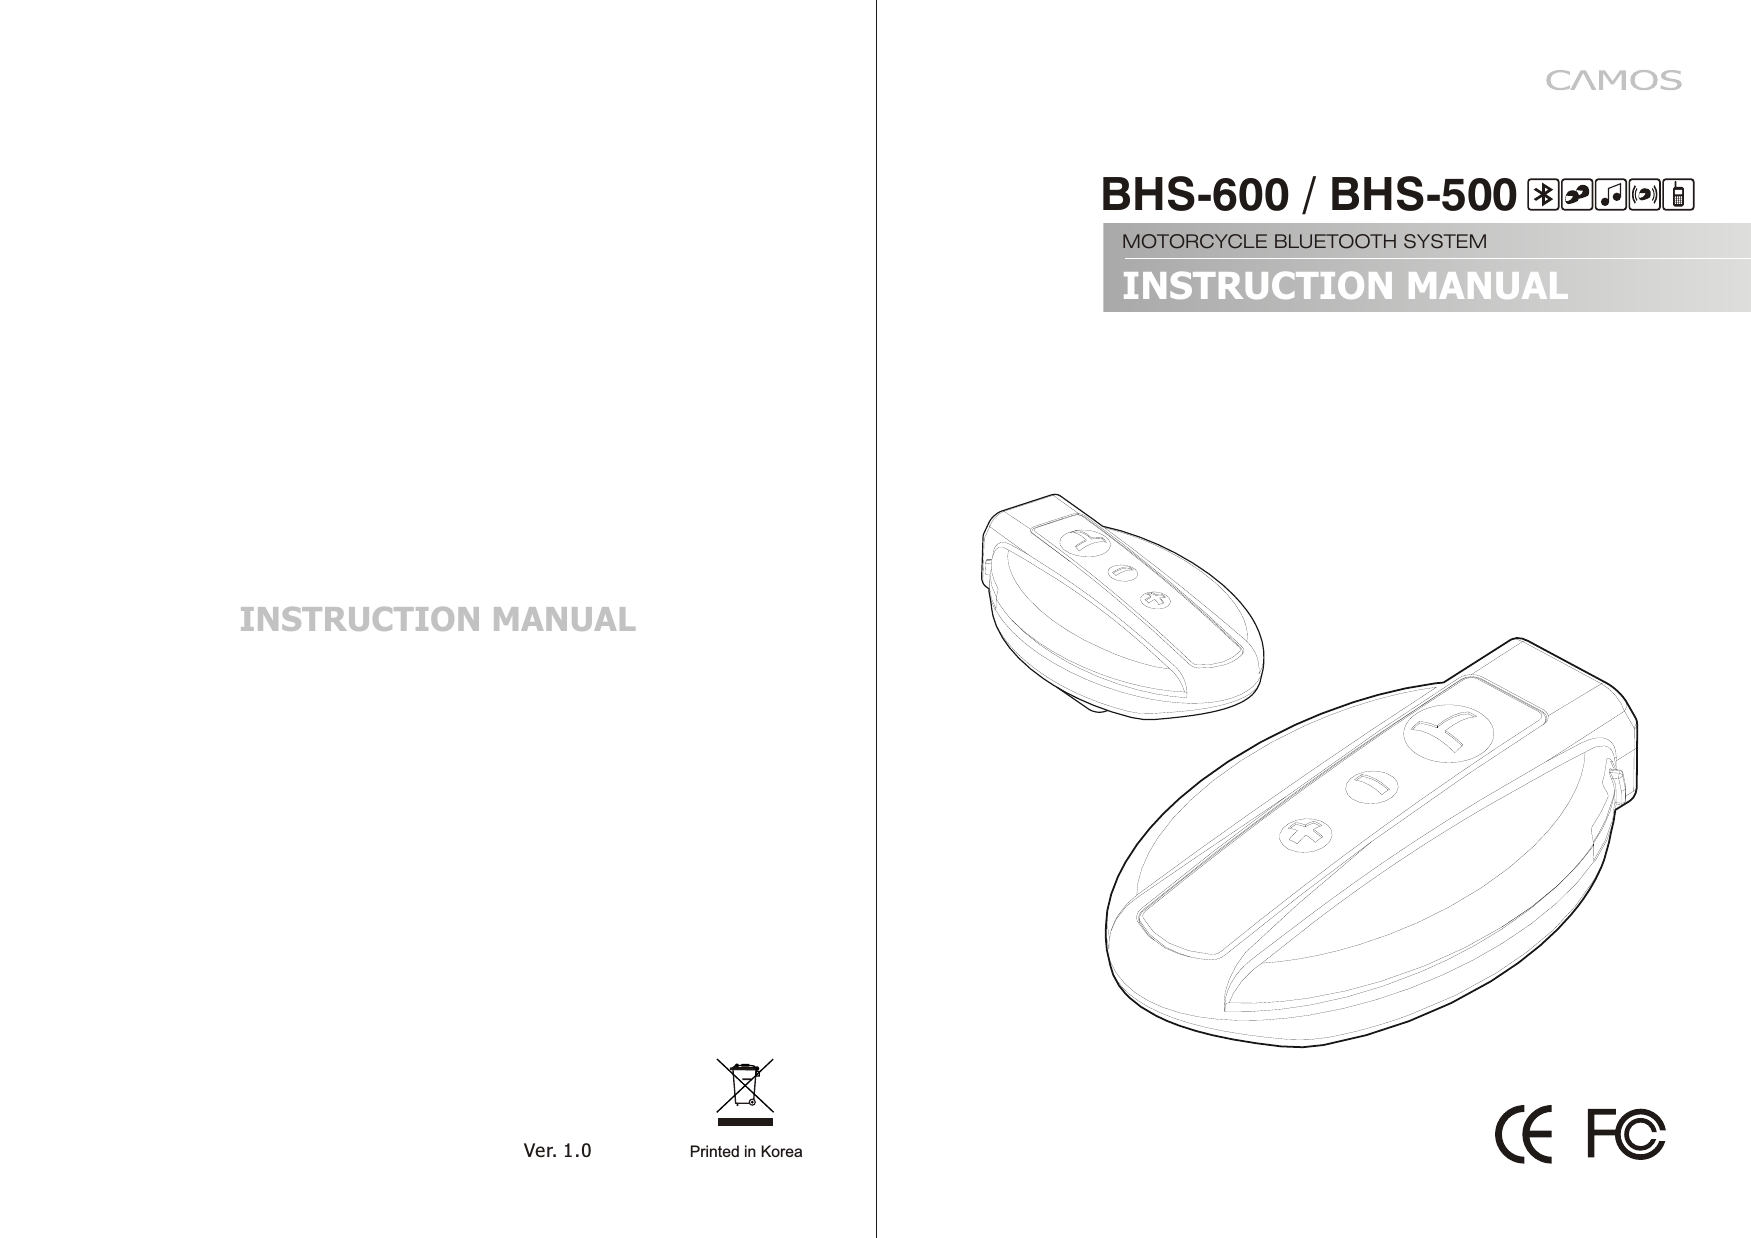 INSTRUCTION MANUALPrinted in KoreaVer. 1.0BHS-600 / BHS-500INSTRUCTION MANUALMOTORCYCLE BLUETOOTH SYSTEM